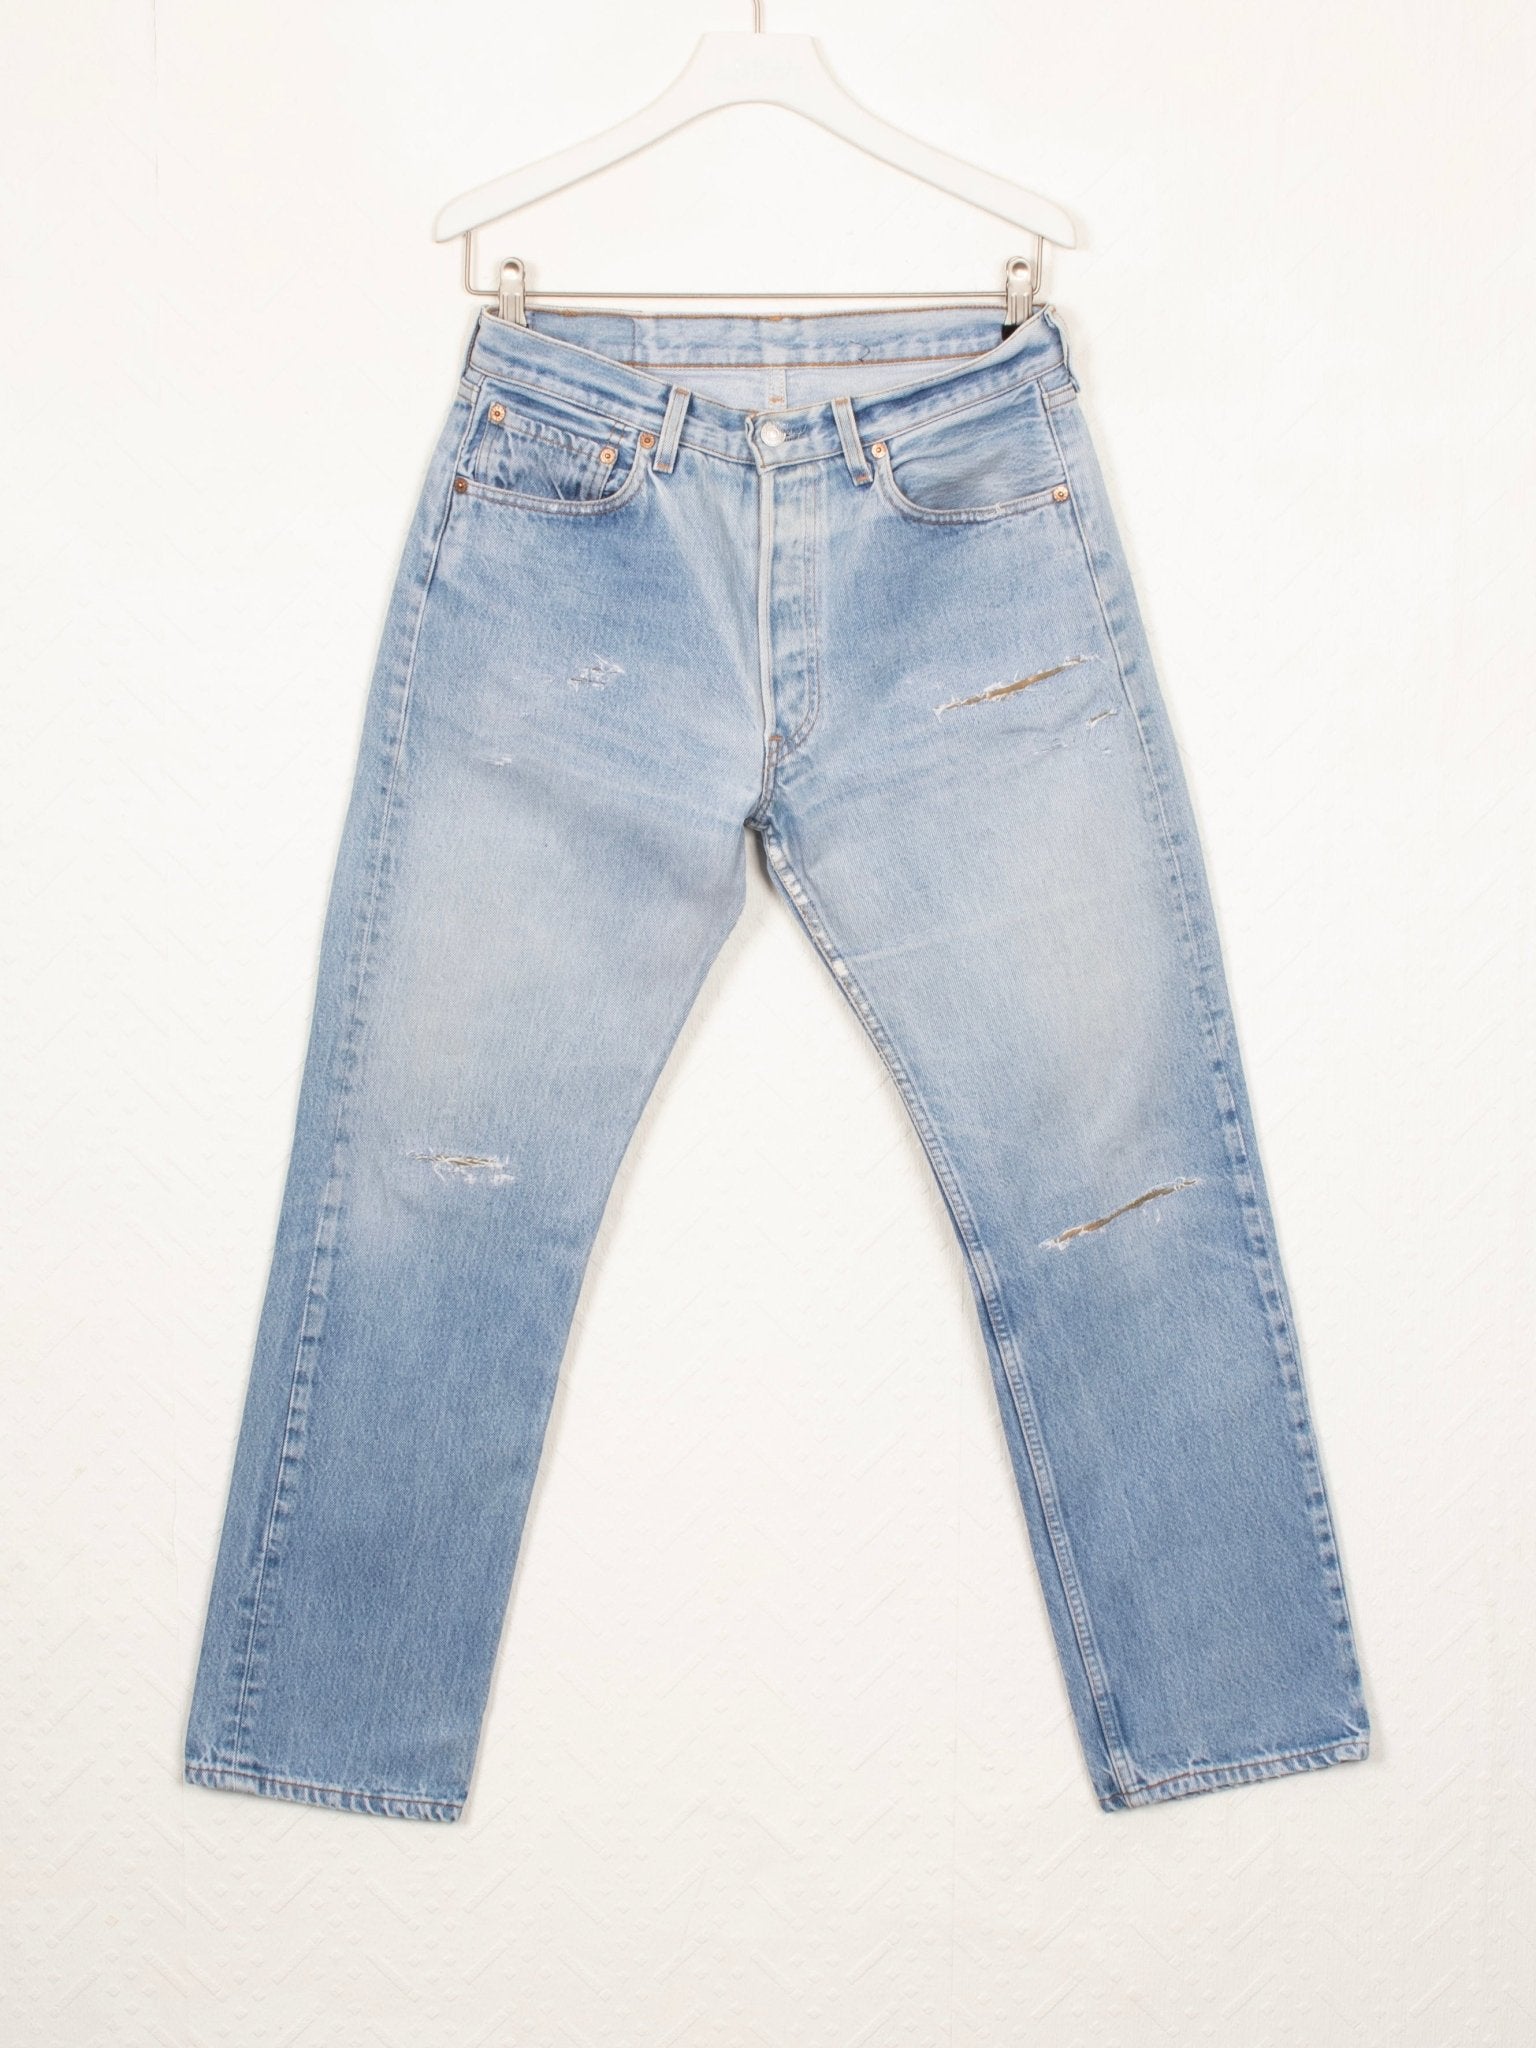 1990s Levi's 501 Faded Blue